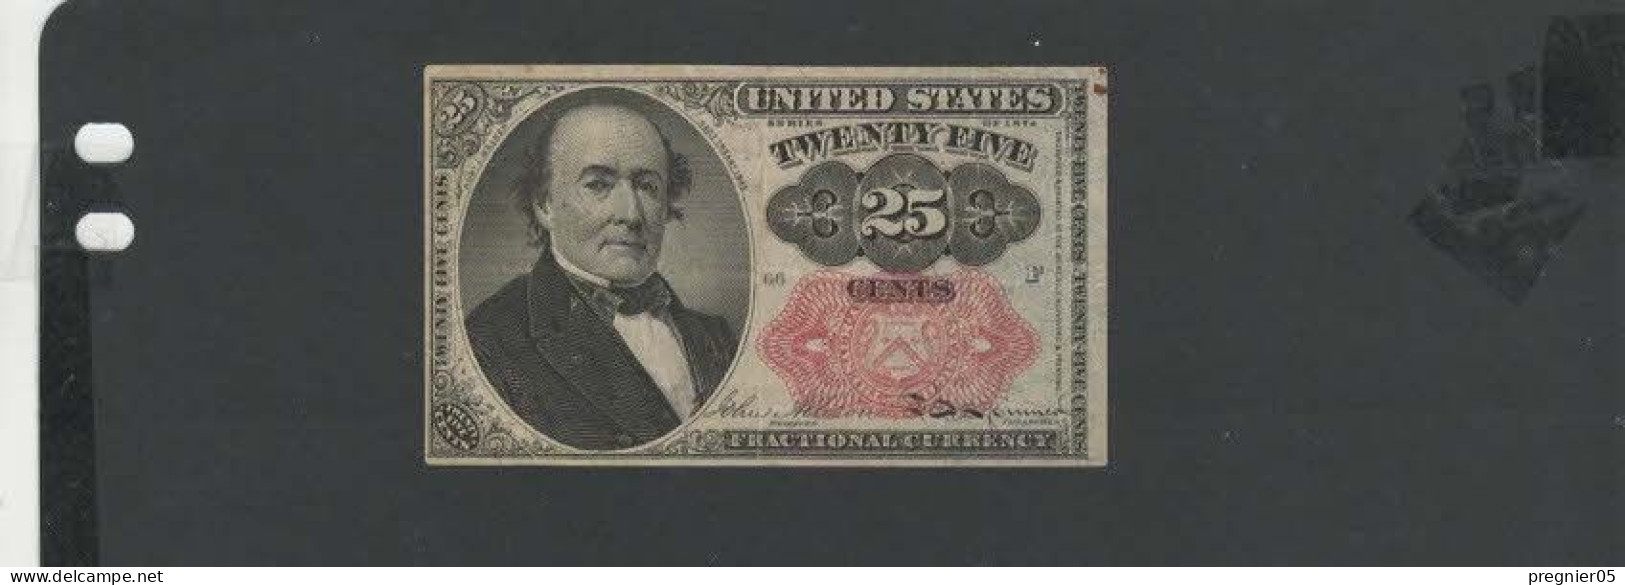 USA - Billet 25 Cents 1874  SUP/XF  P.123 - United States Notes (1862-1923)